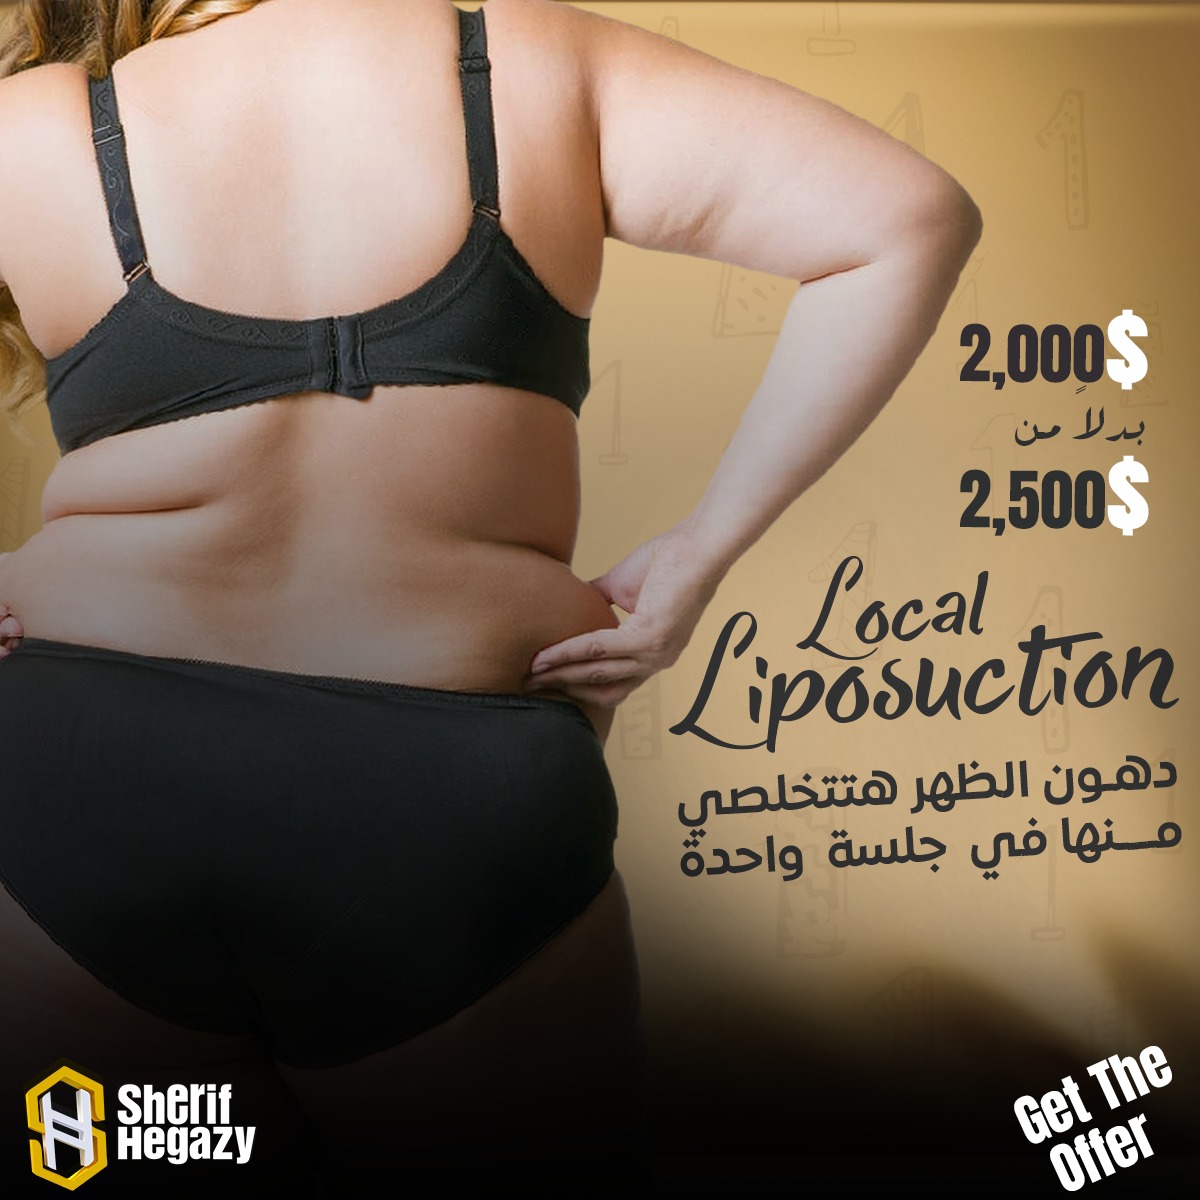 local liposuction offer